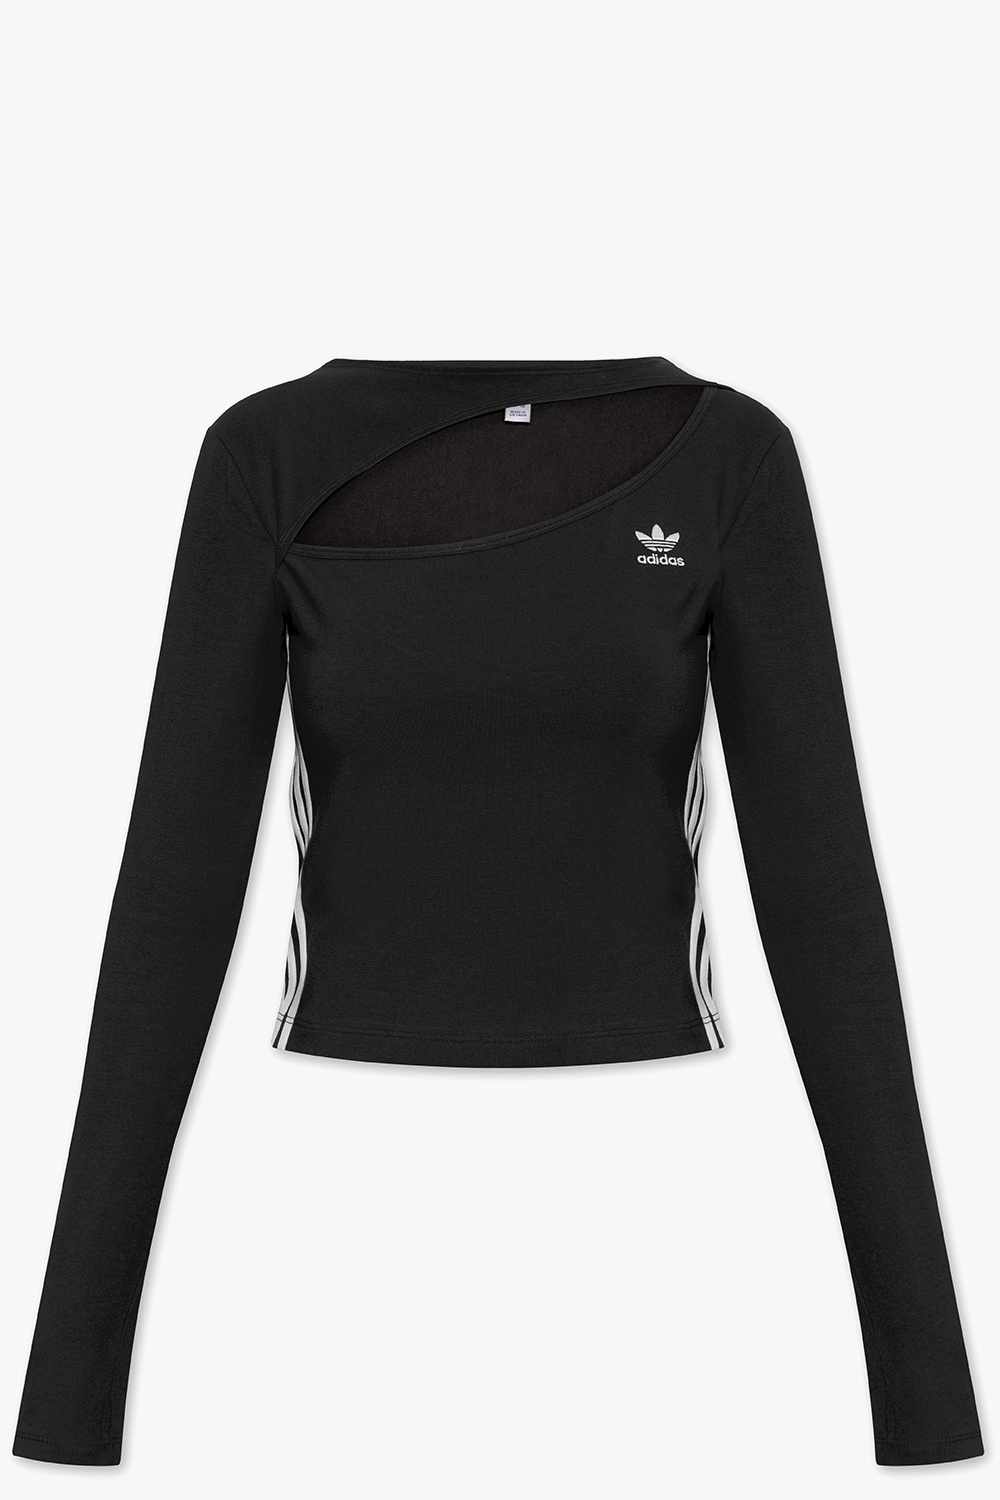 ADIDAS Originals Top with cut-out